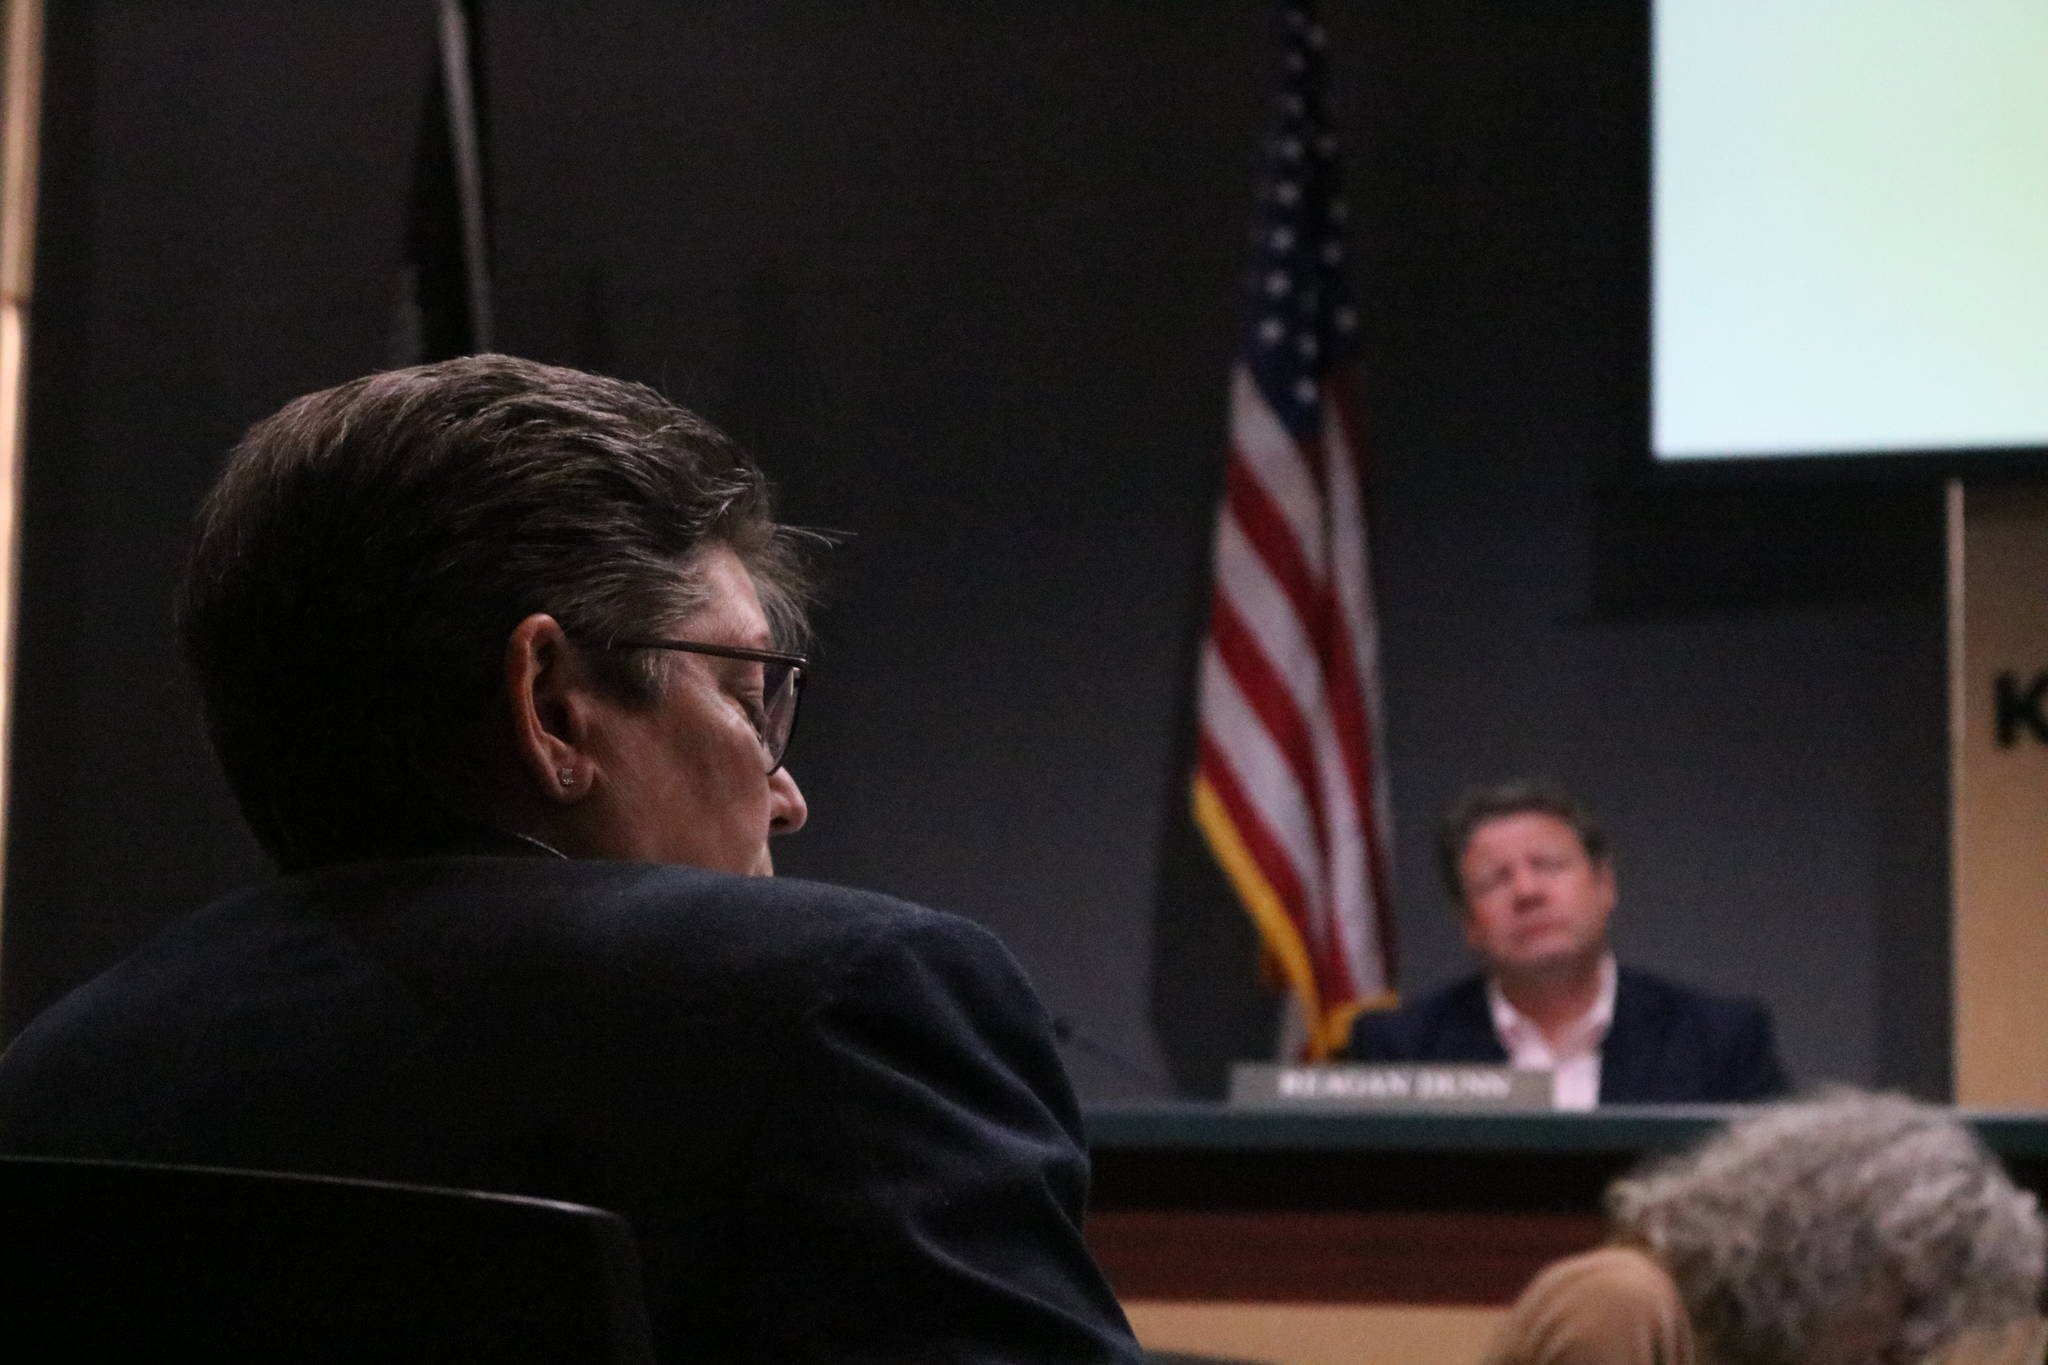 Sheriff Mitzi Johanknecht gave a response to an Office of Law Enforcement Oversight report on Feb. 25 before the King County Law and Justice Committee. The report recommended ways her department could reform use of force policy and internal investigations. Aaron Kunkler/staff photo